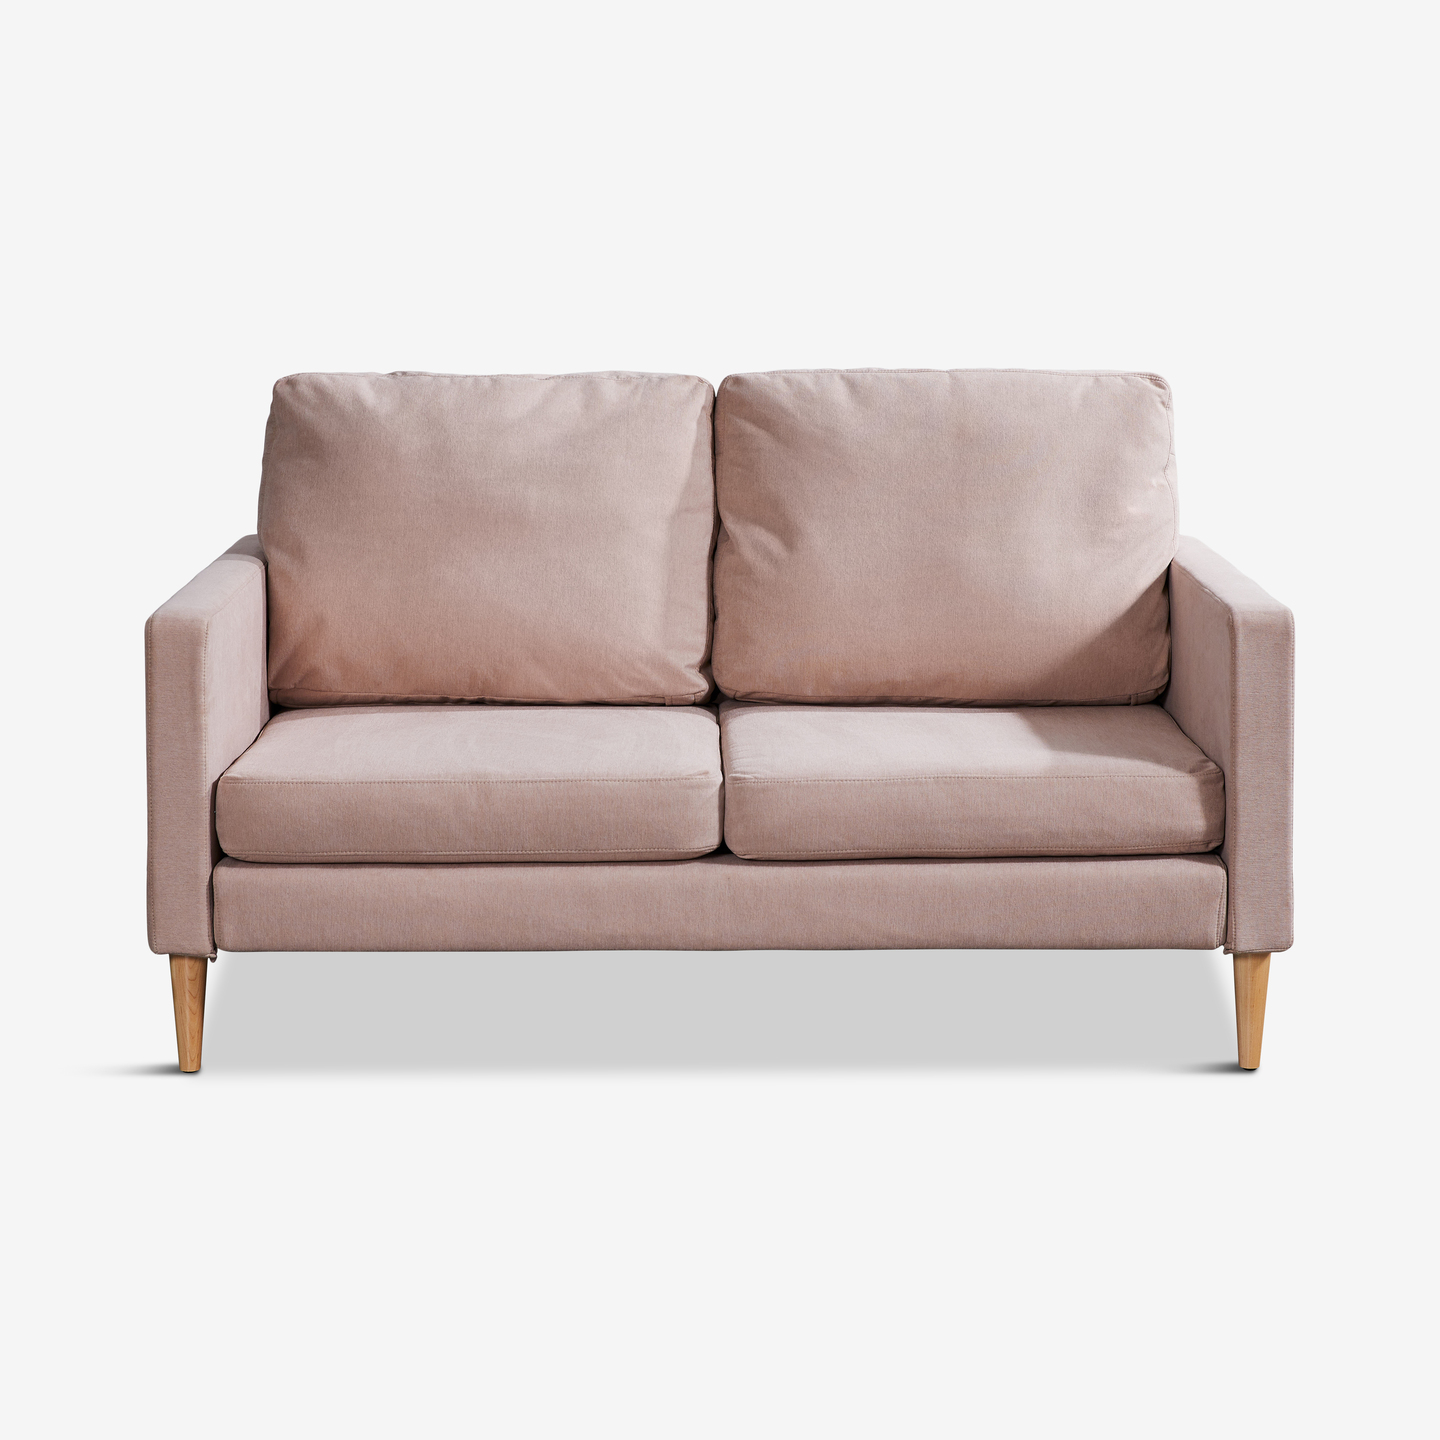 422_Campaign-Loveseat-Dusty-Rose_Flat-Front_california-chic_Living-Room-5 2020